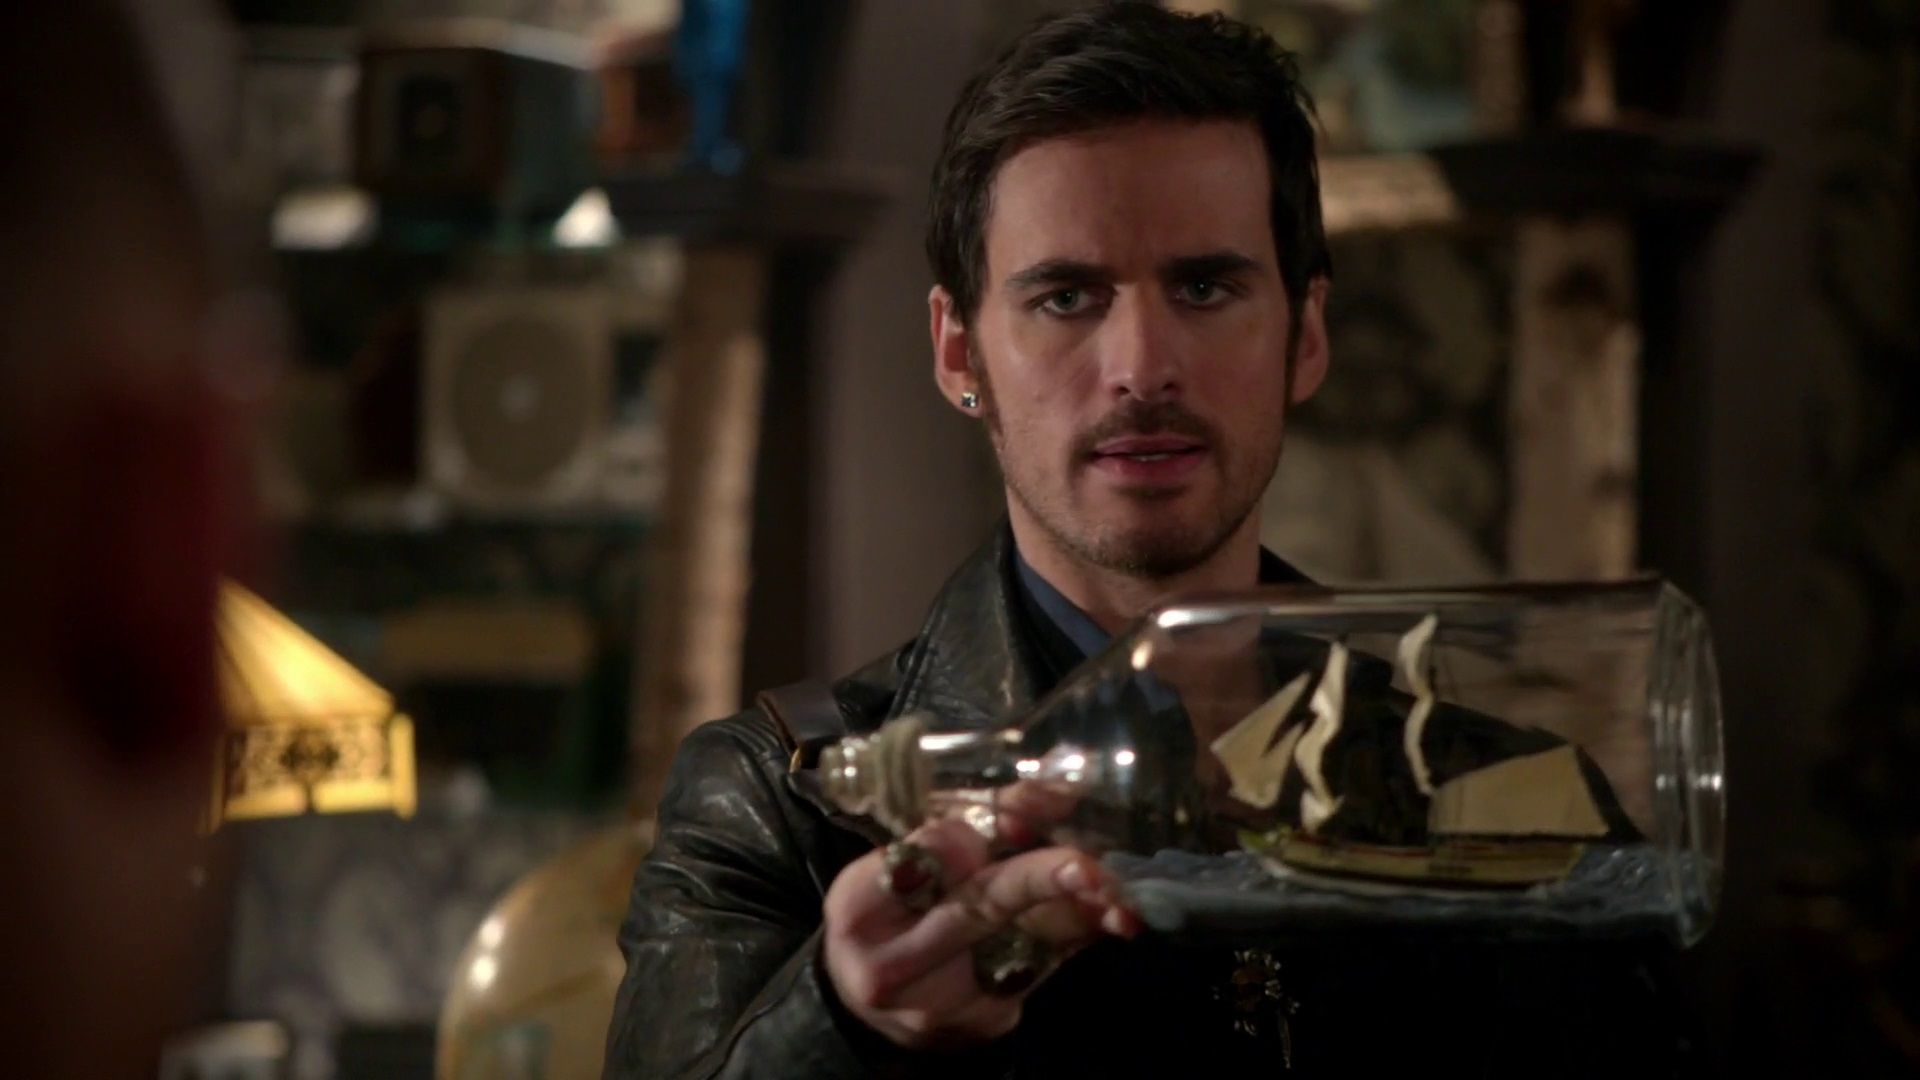 Hook pressured Emma into their relationship in many ways - demanding a kiss...